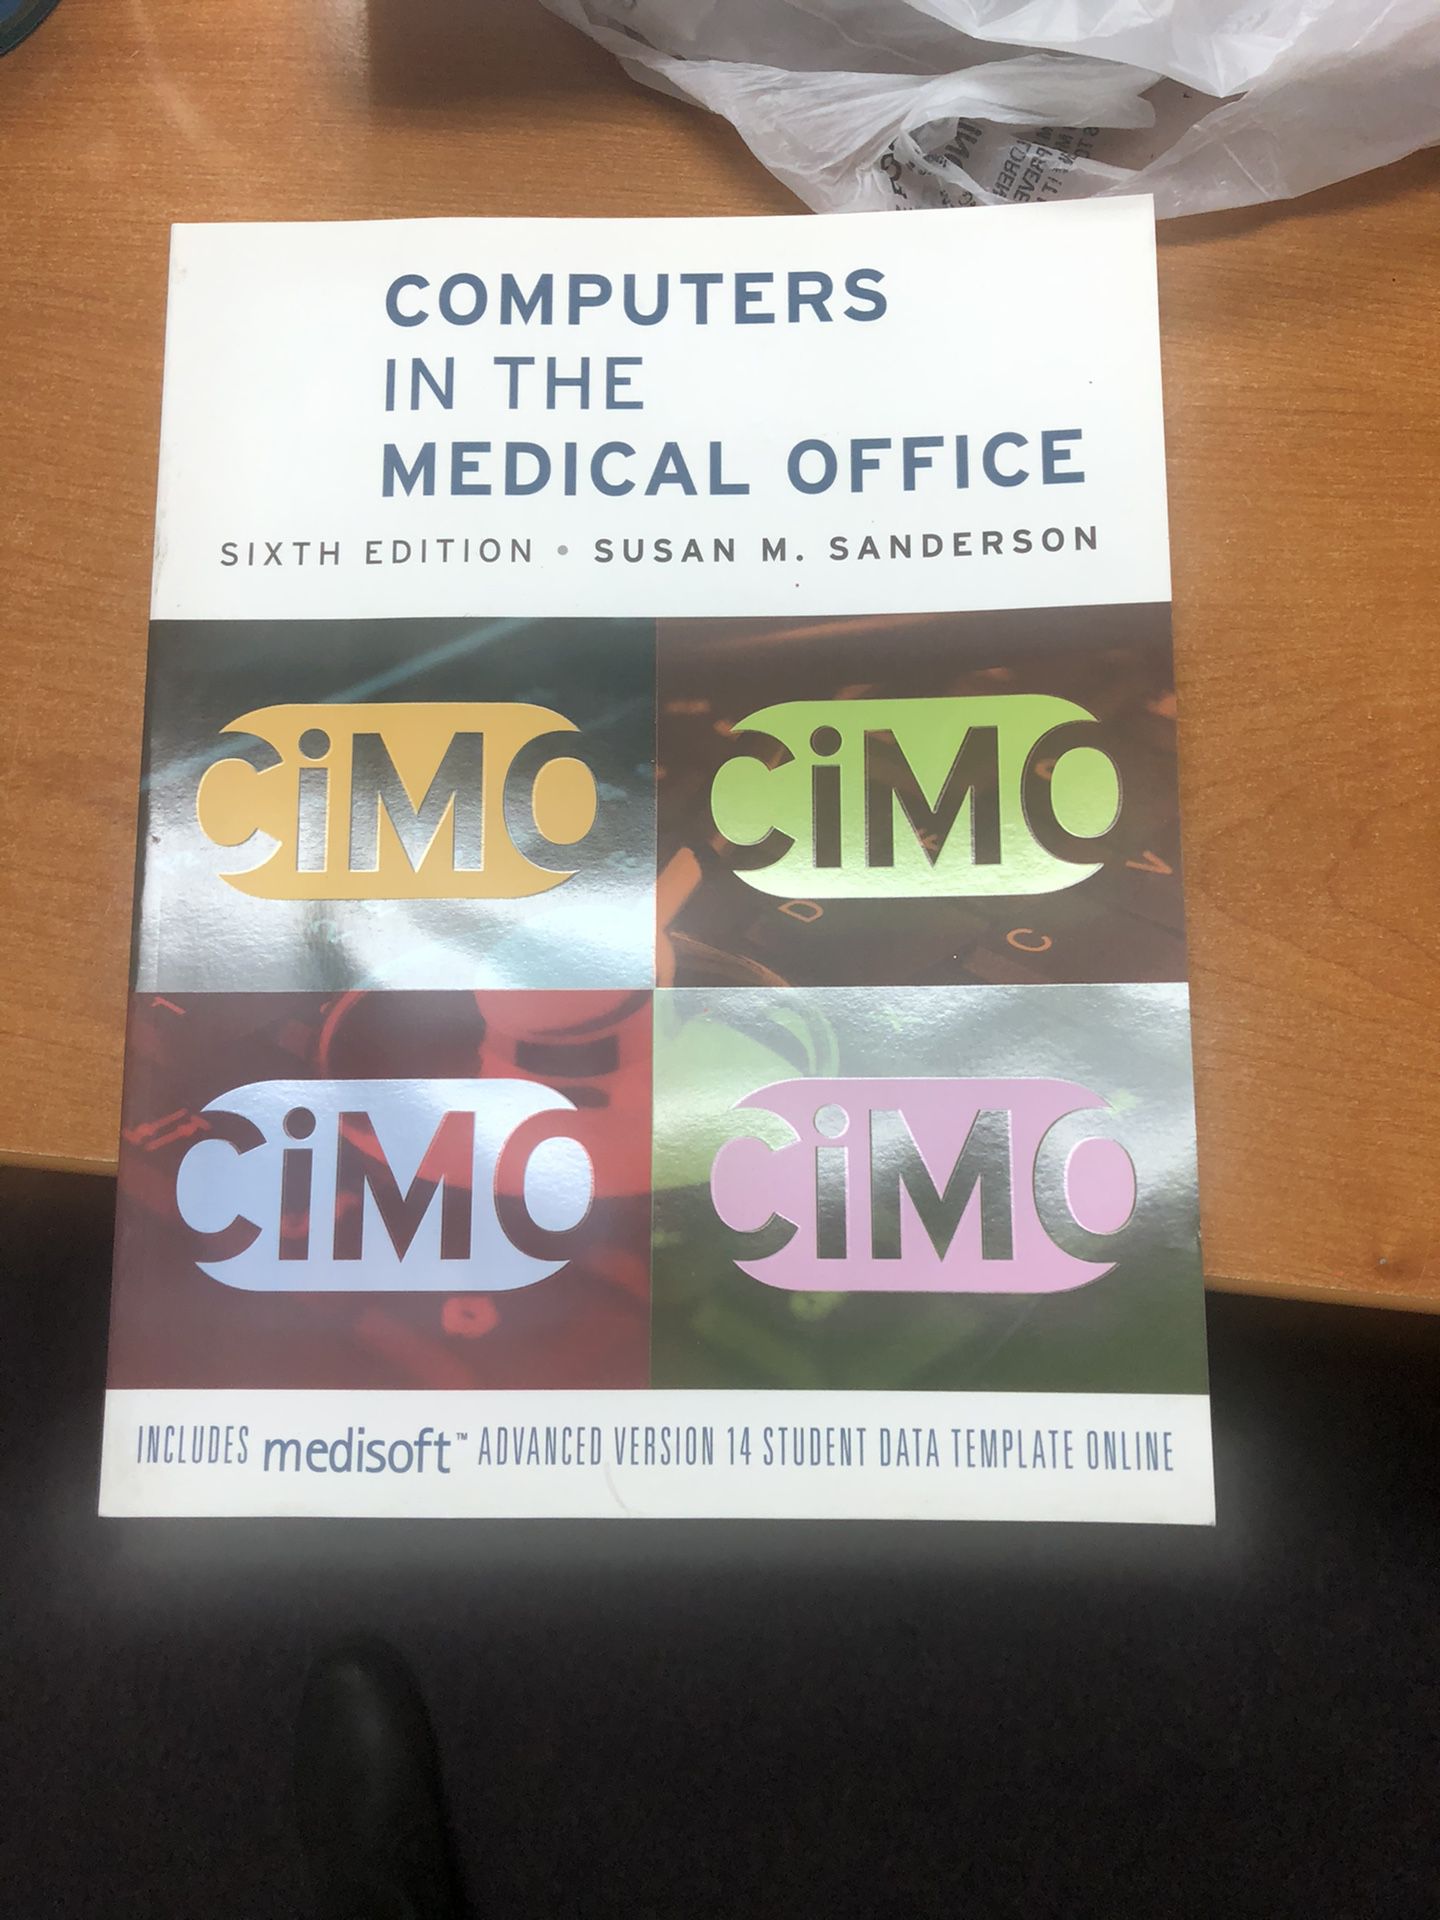 Computers in the medical office book